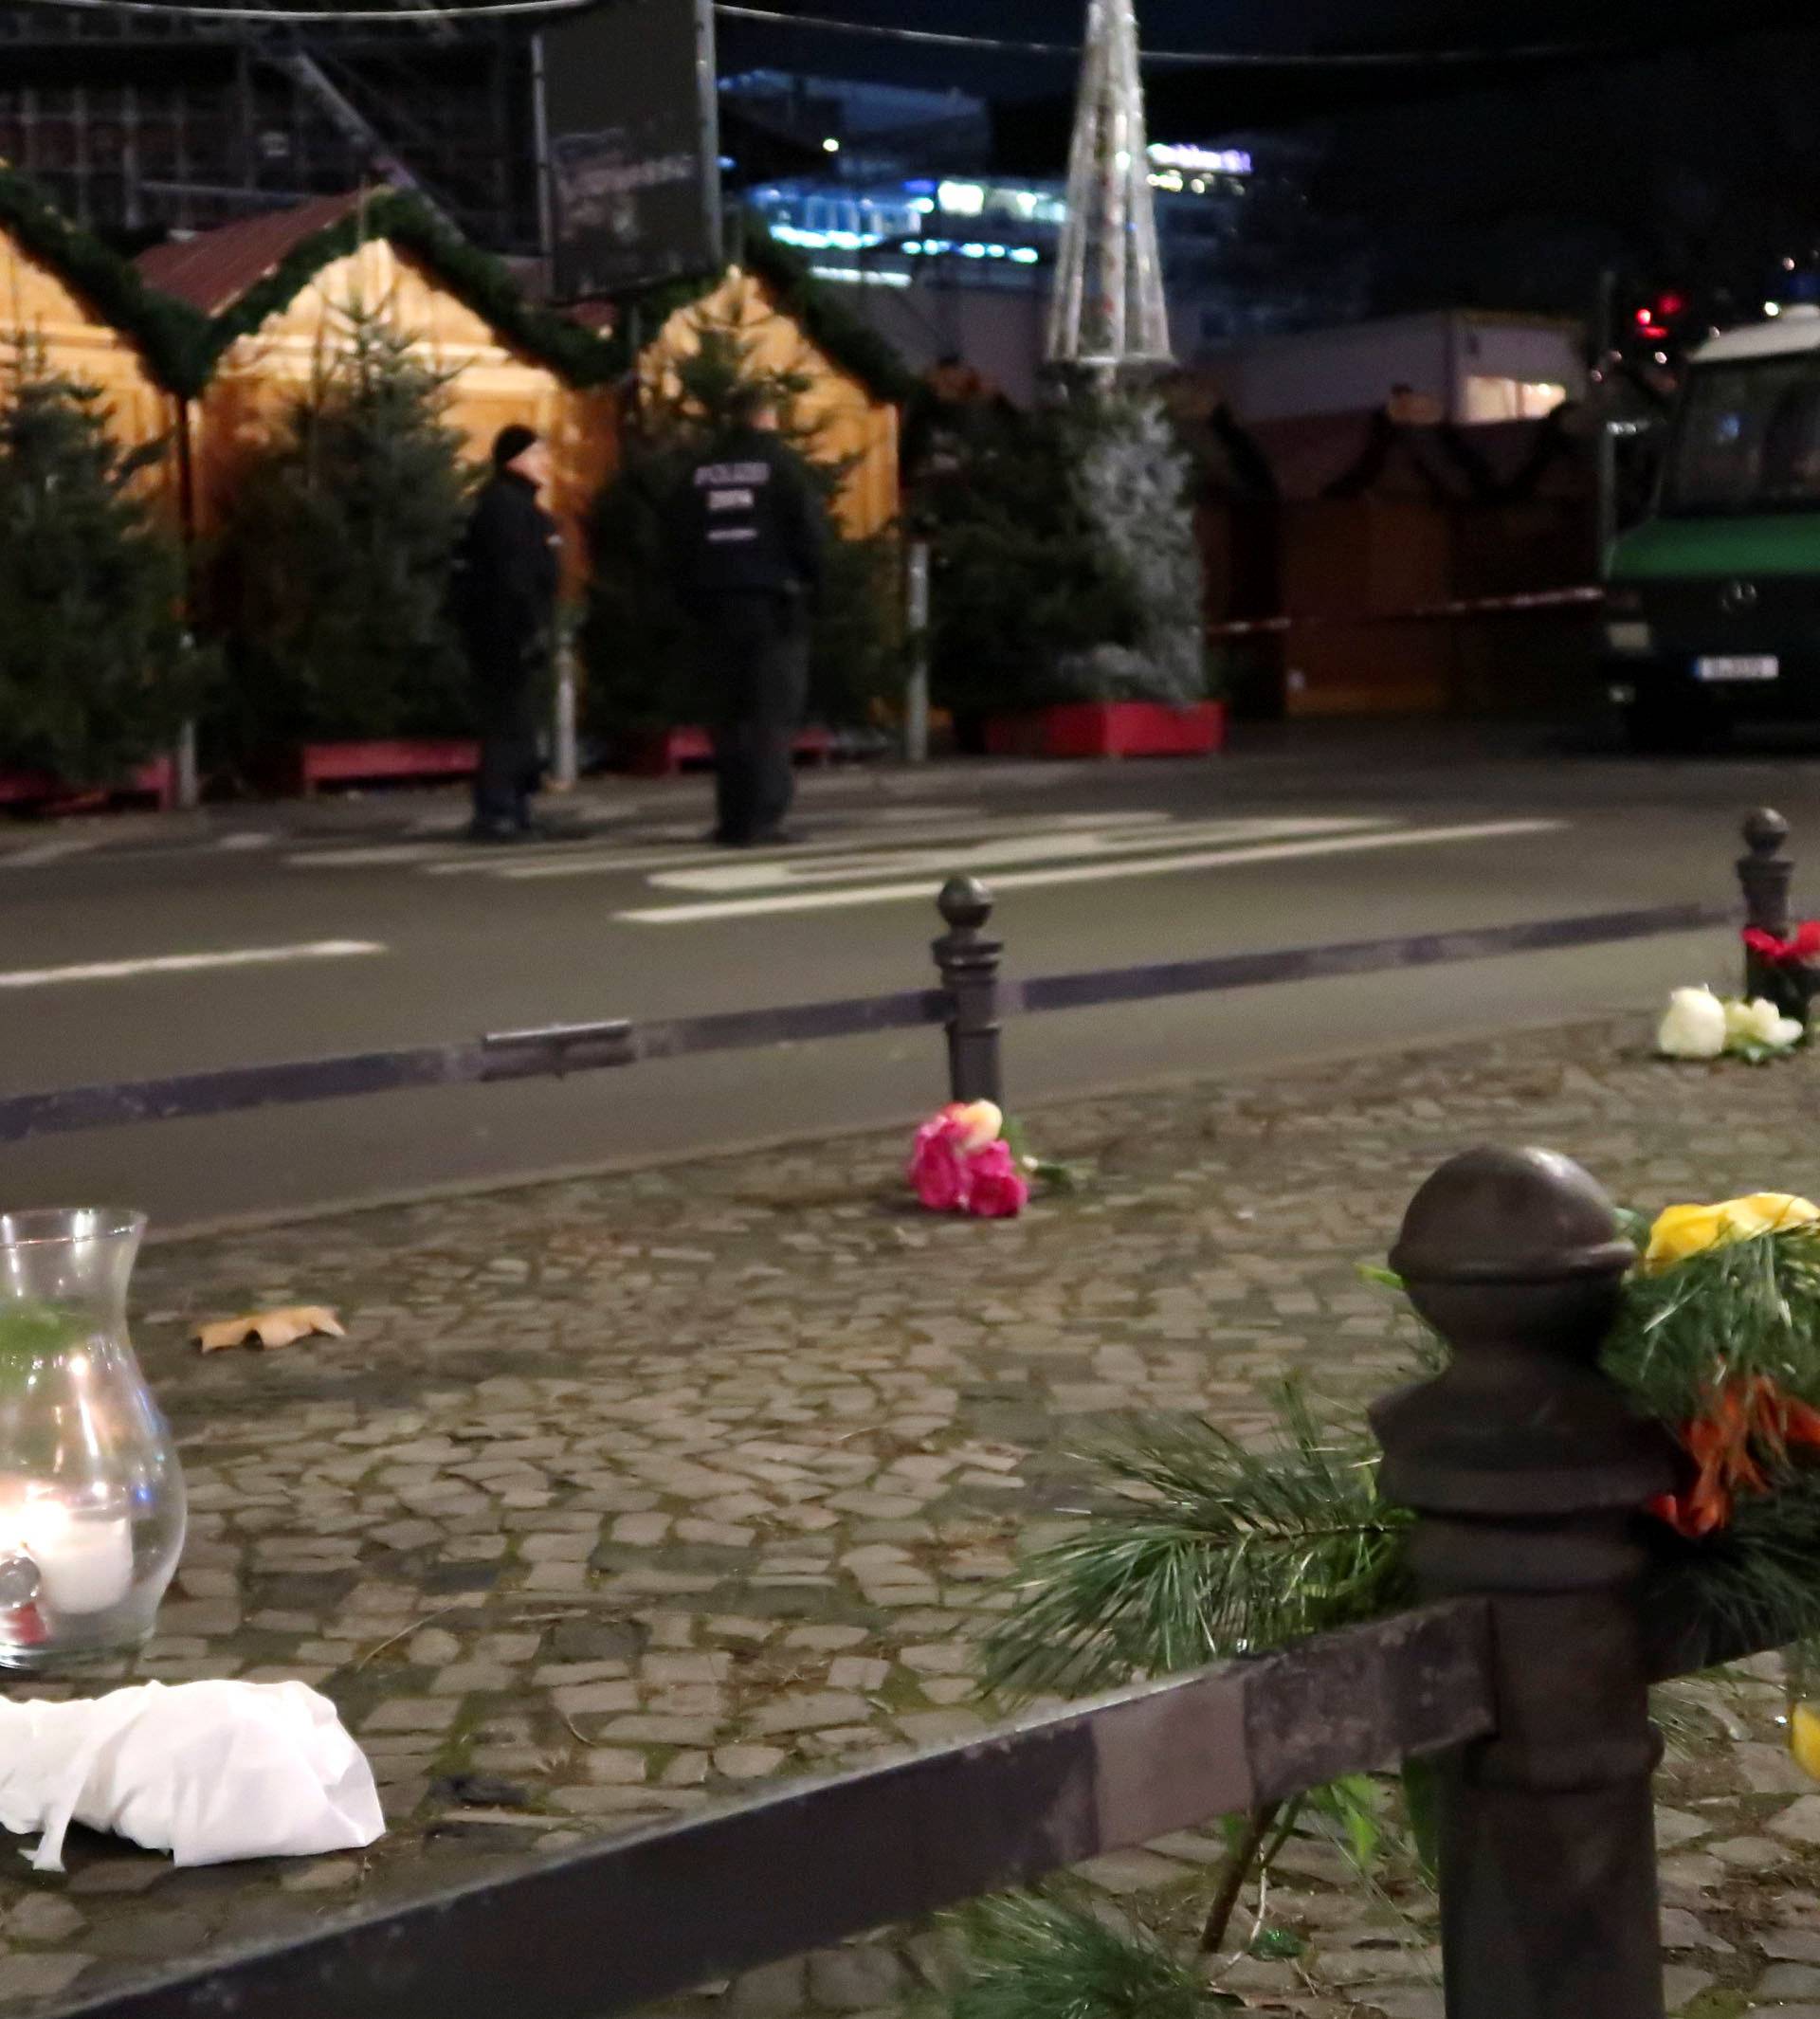 A candle and flowers are seen near the site where a truck ploughed through a crowd at a Berlin Christmas market